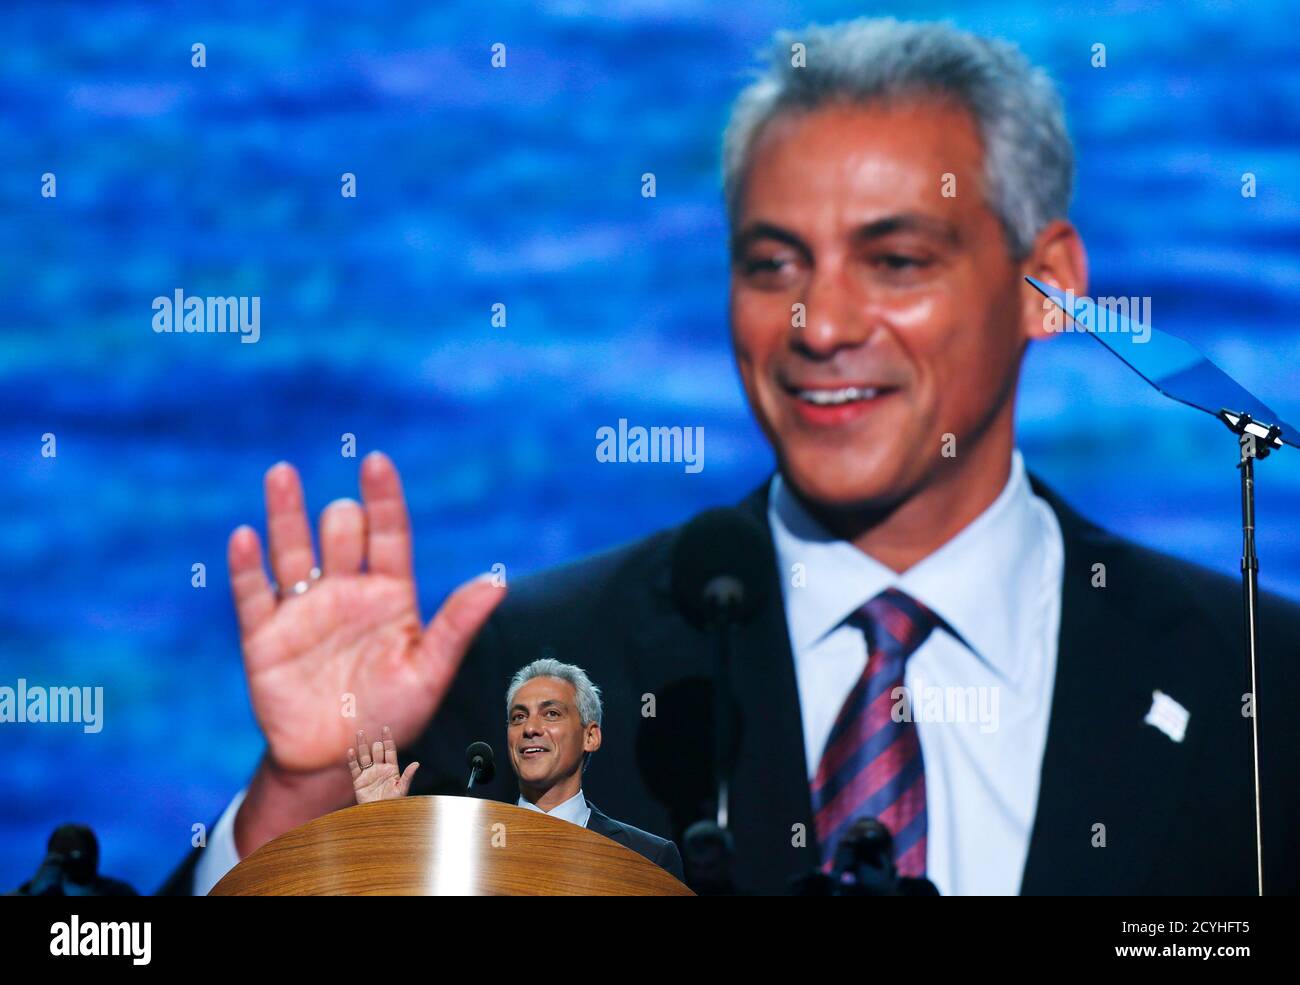 Chicago mayor Rahm Emanuel addresses delegates at the 2012 Democratic  National Convention in Charlotte, North Carolina, September 4, 2012.  REUTERS/Jim Young (UNITED STATES - Tags: ELECTIONS POLITICS Stock Photo -  Alamy